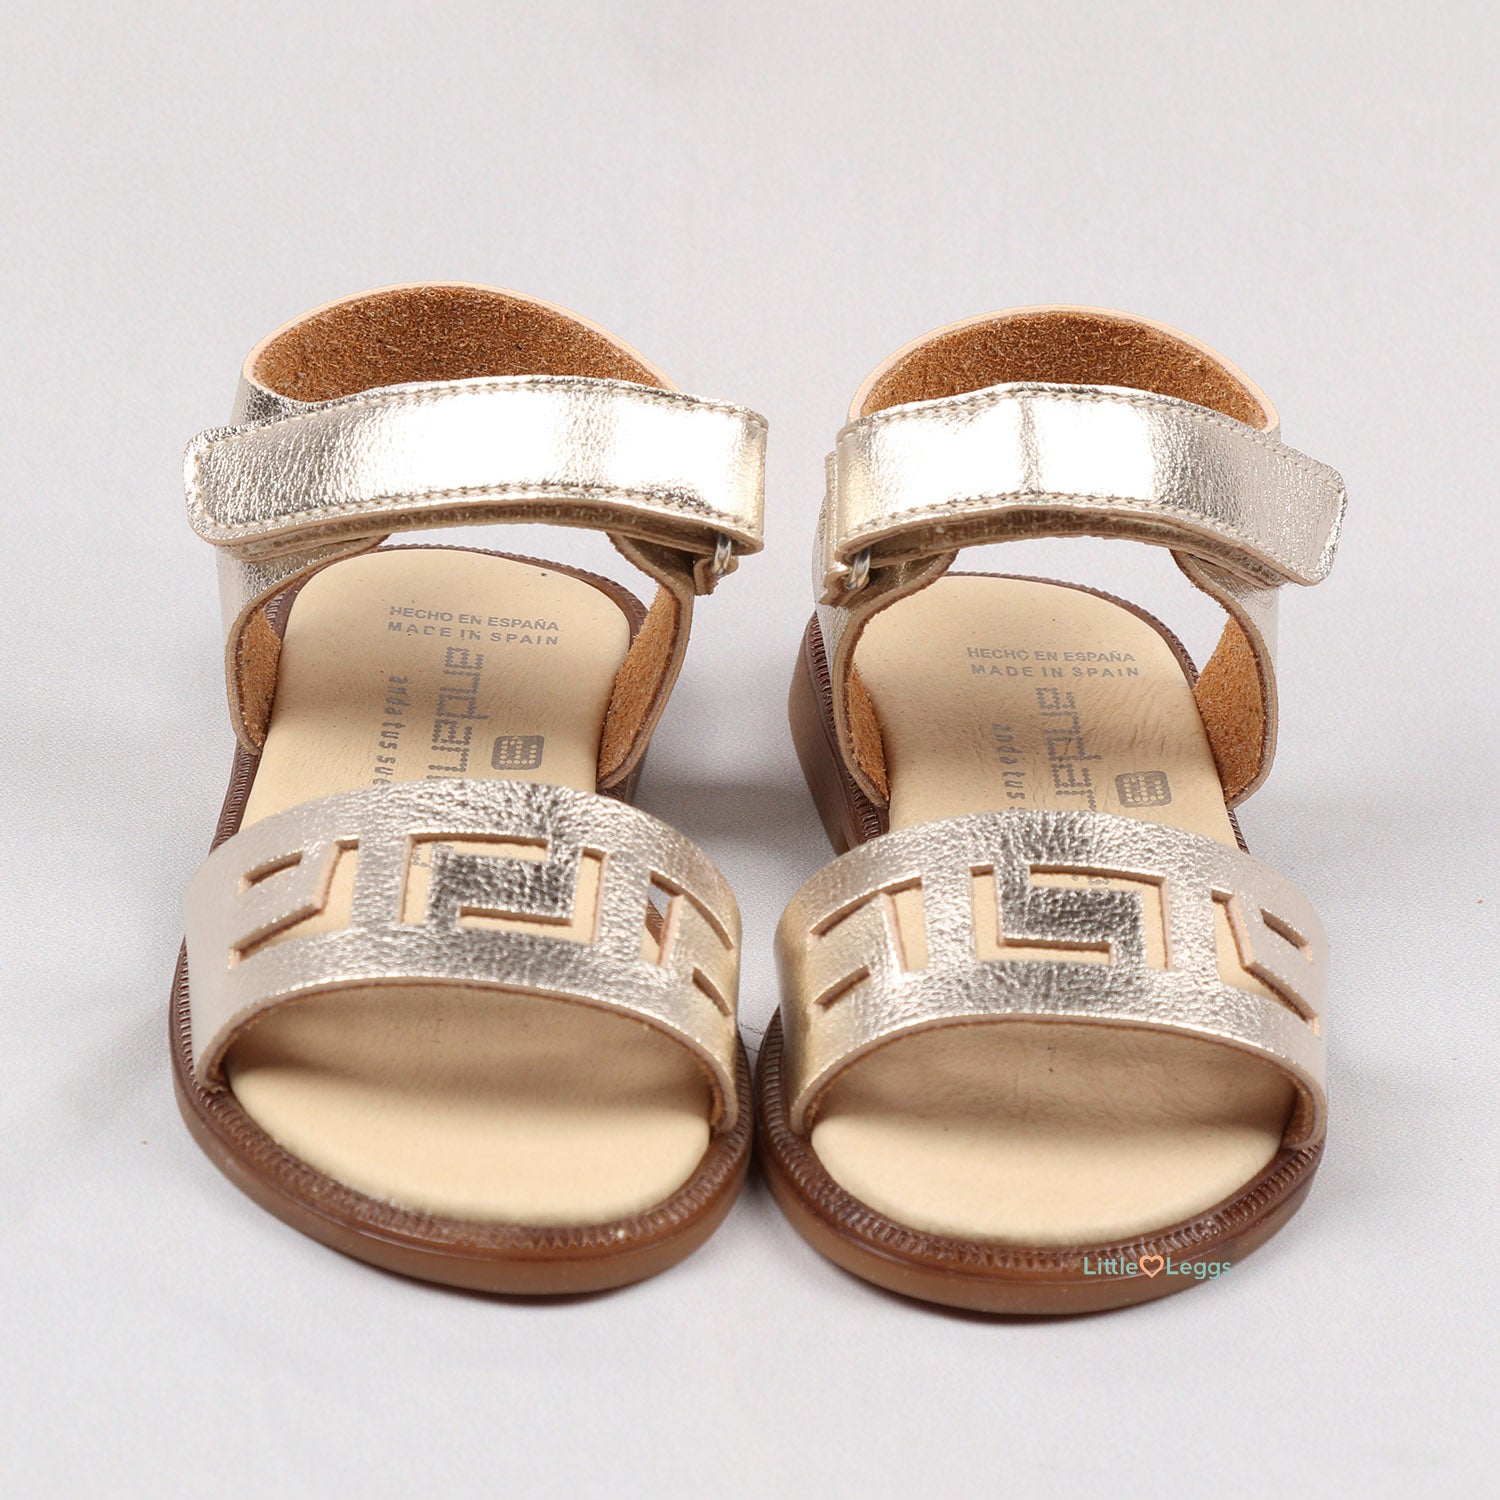 Gold Patterned Leather Sandals